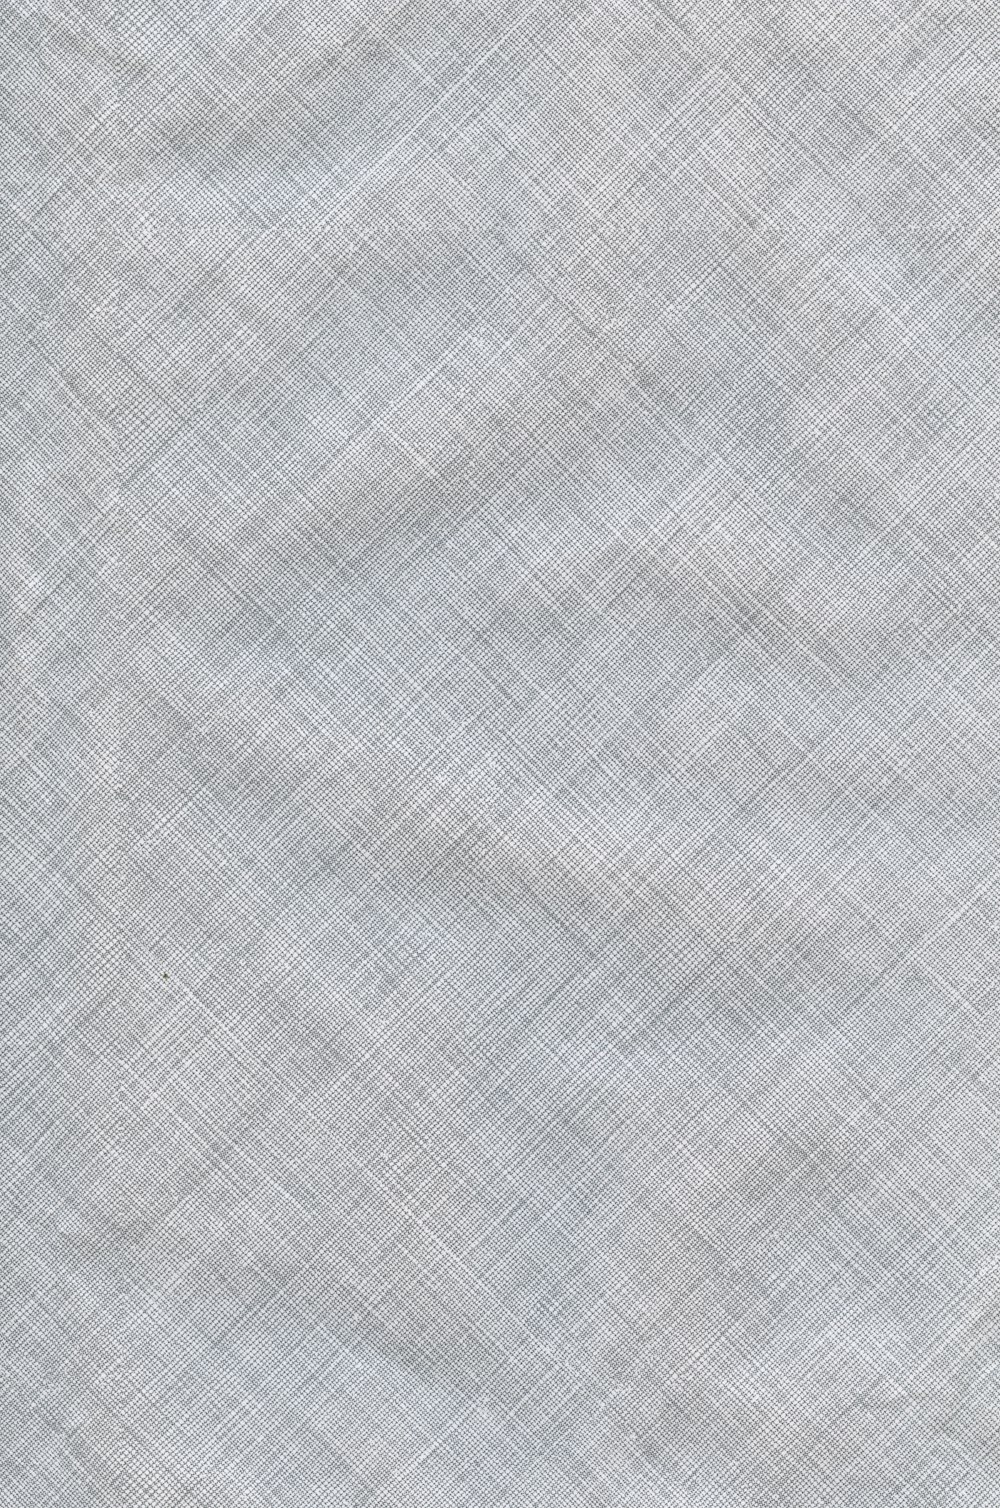 a light blue fabric textured with a diagonal pattern